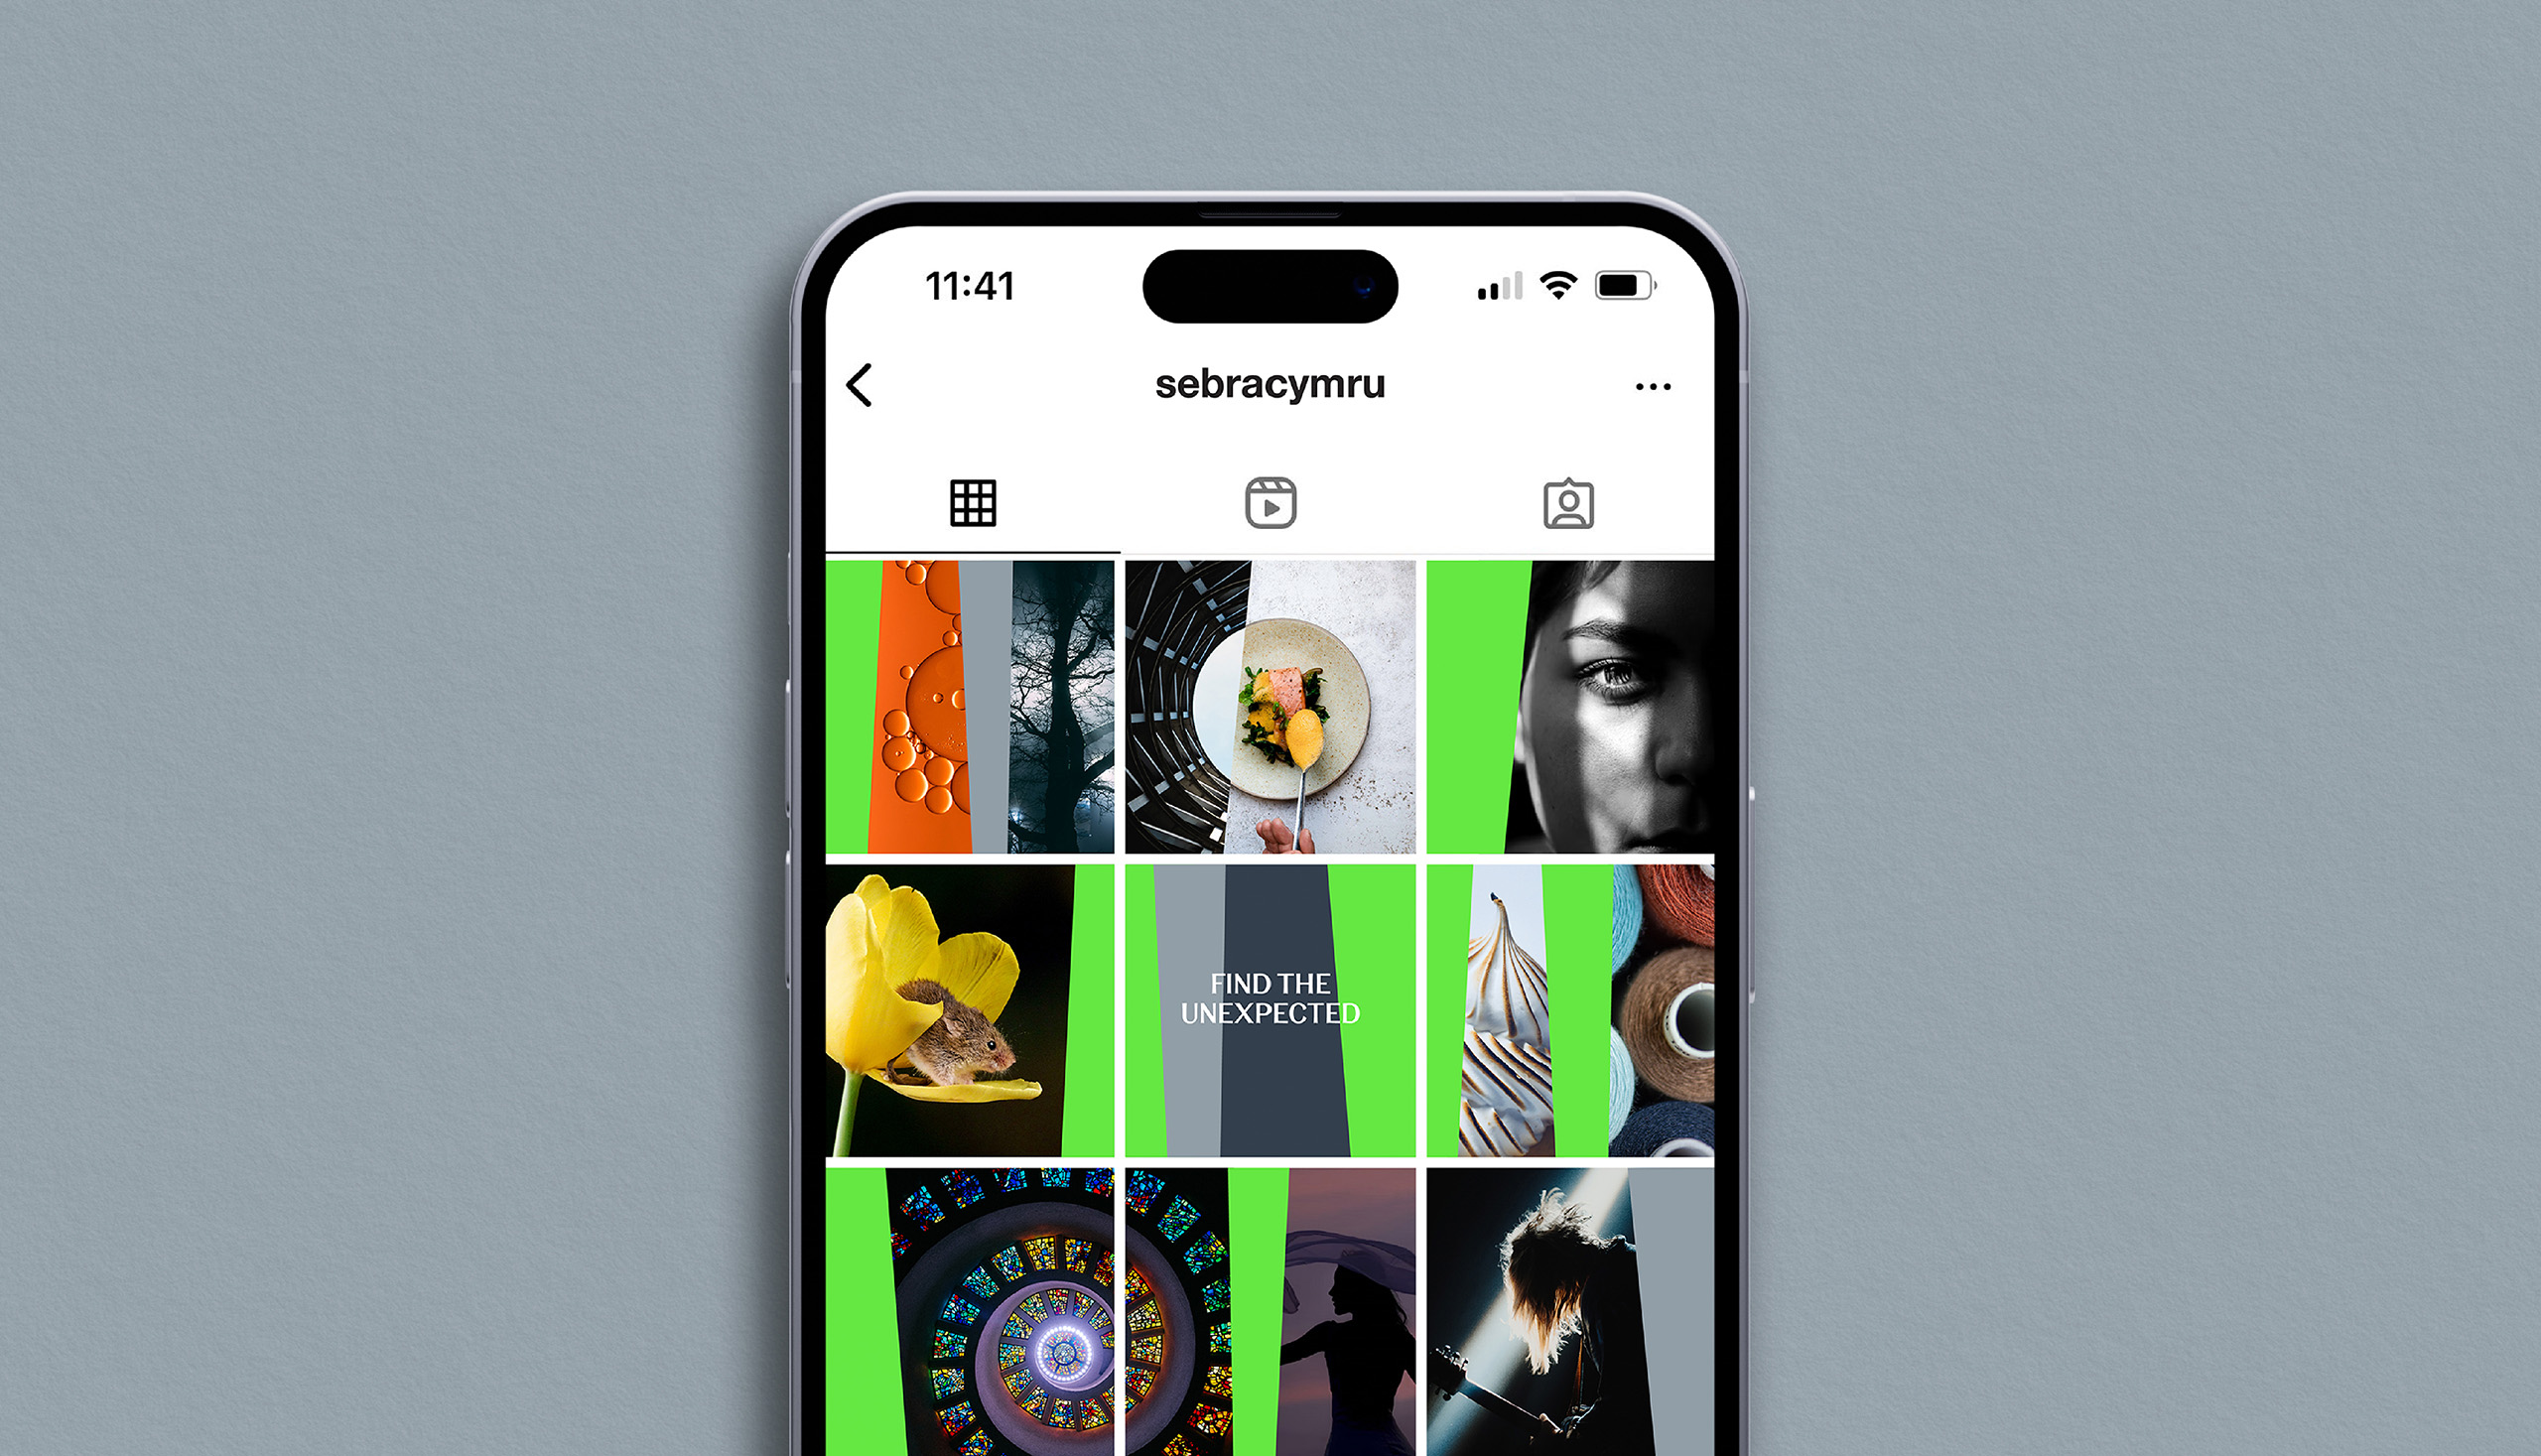 Branded Instagram images on phone screen against grey background